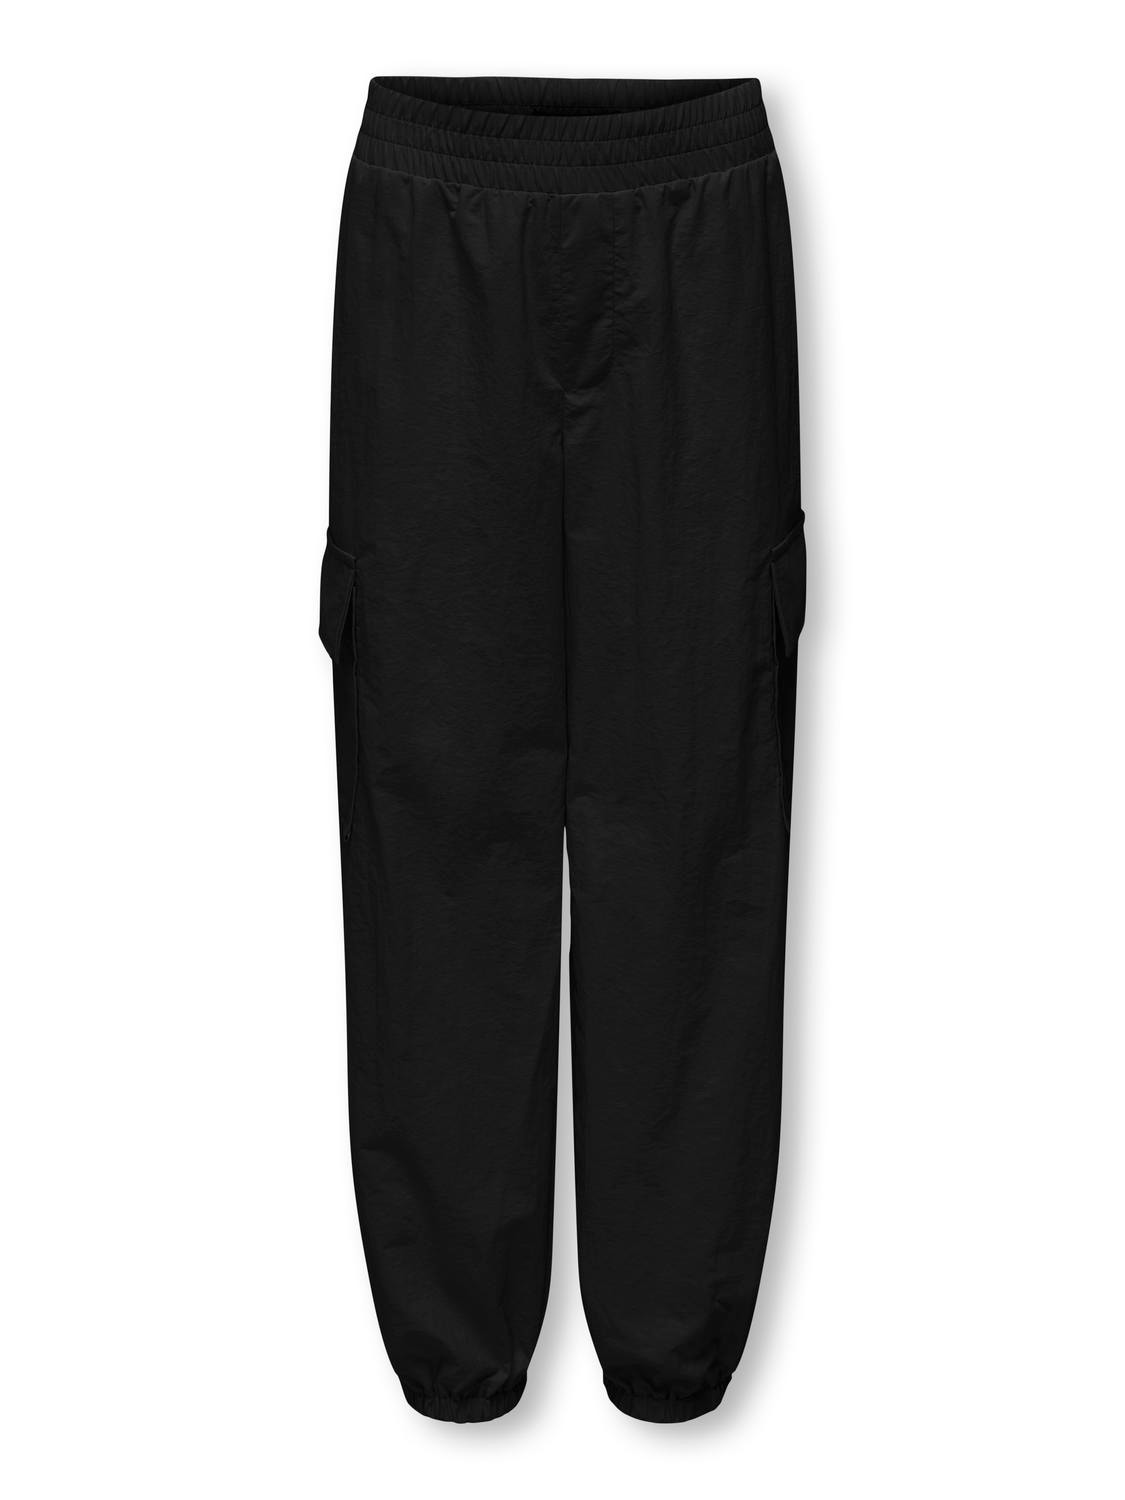 ONLY Cargo trousers with mid waist -Black - 15304165